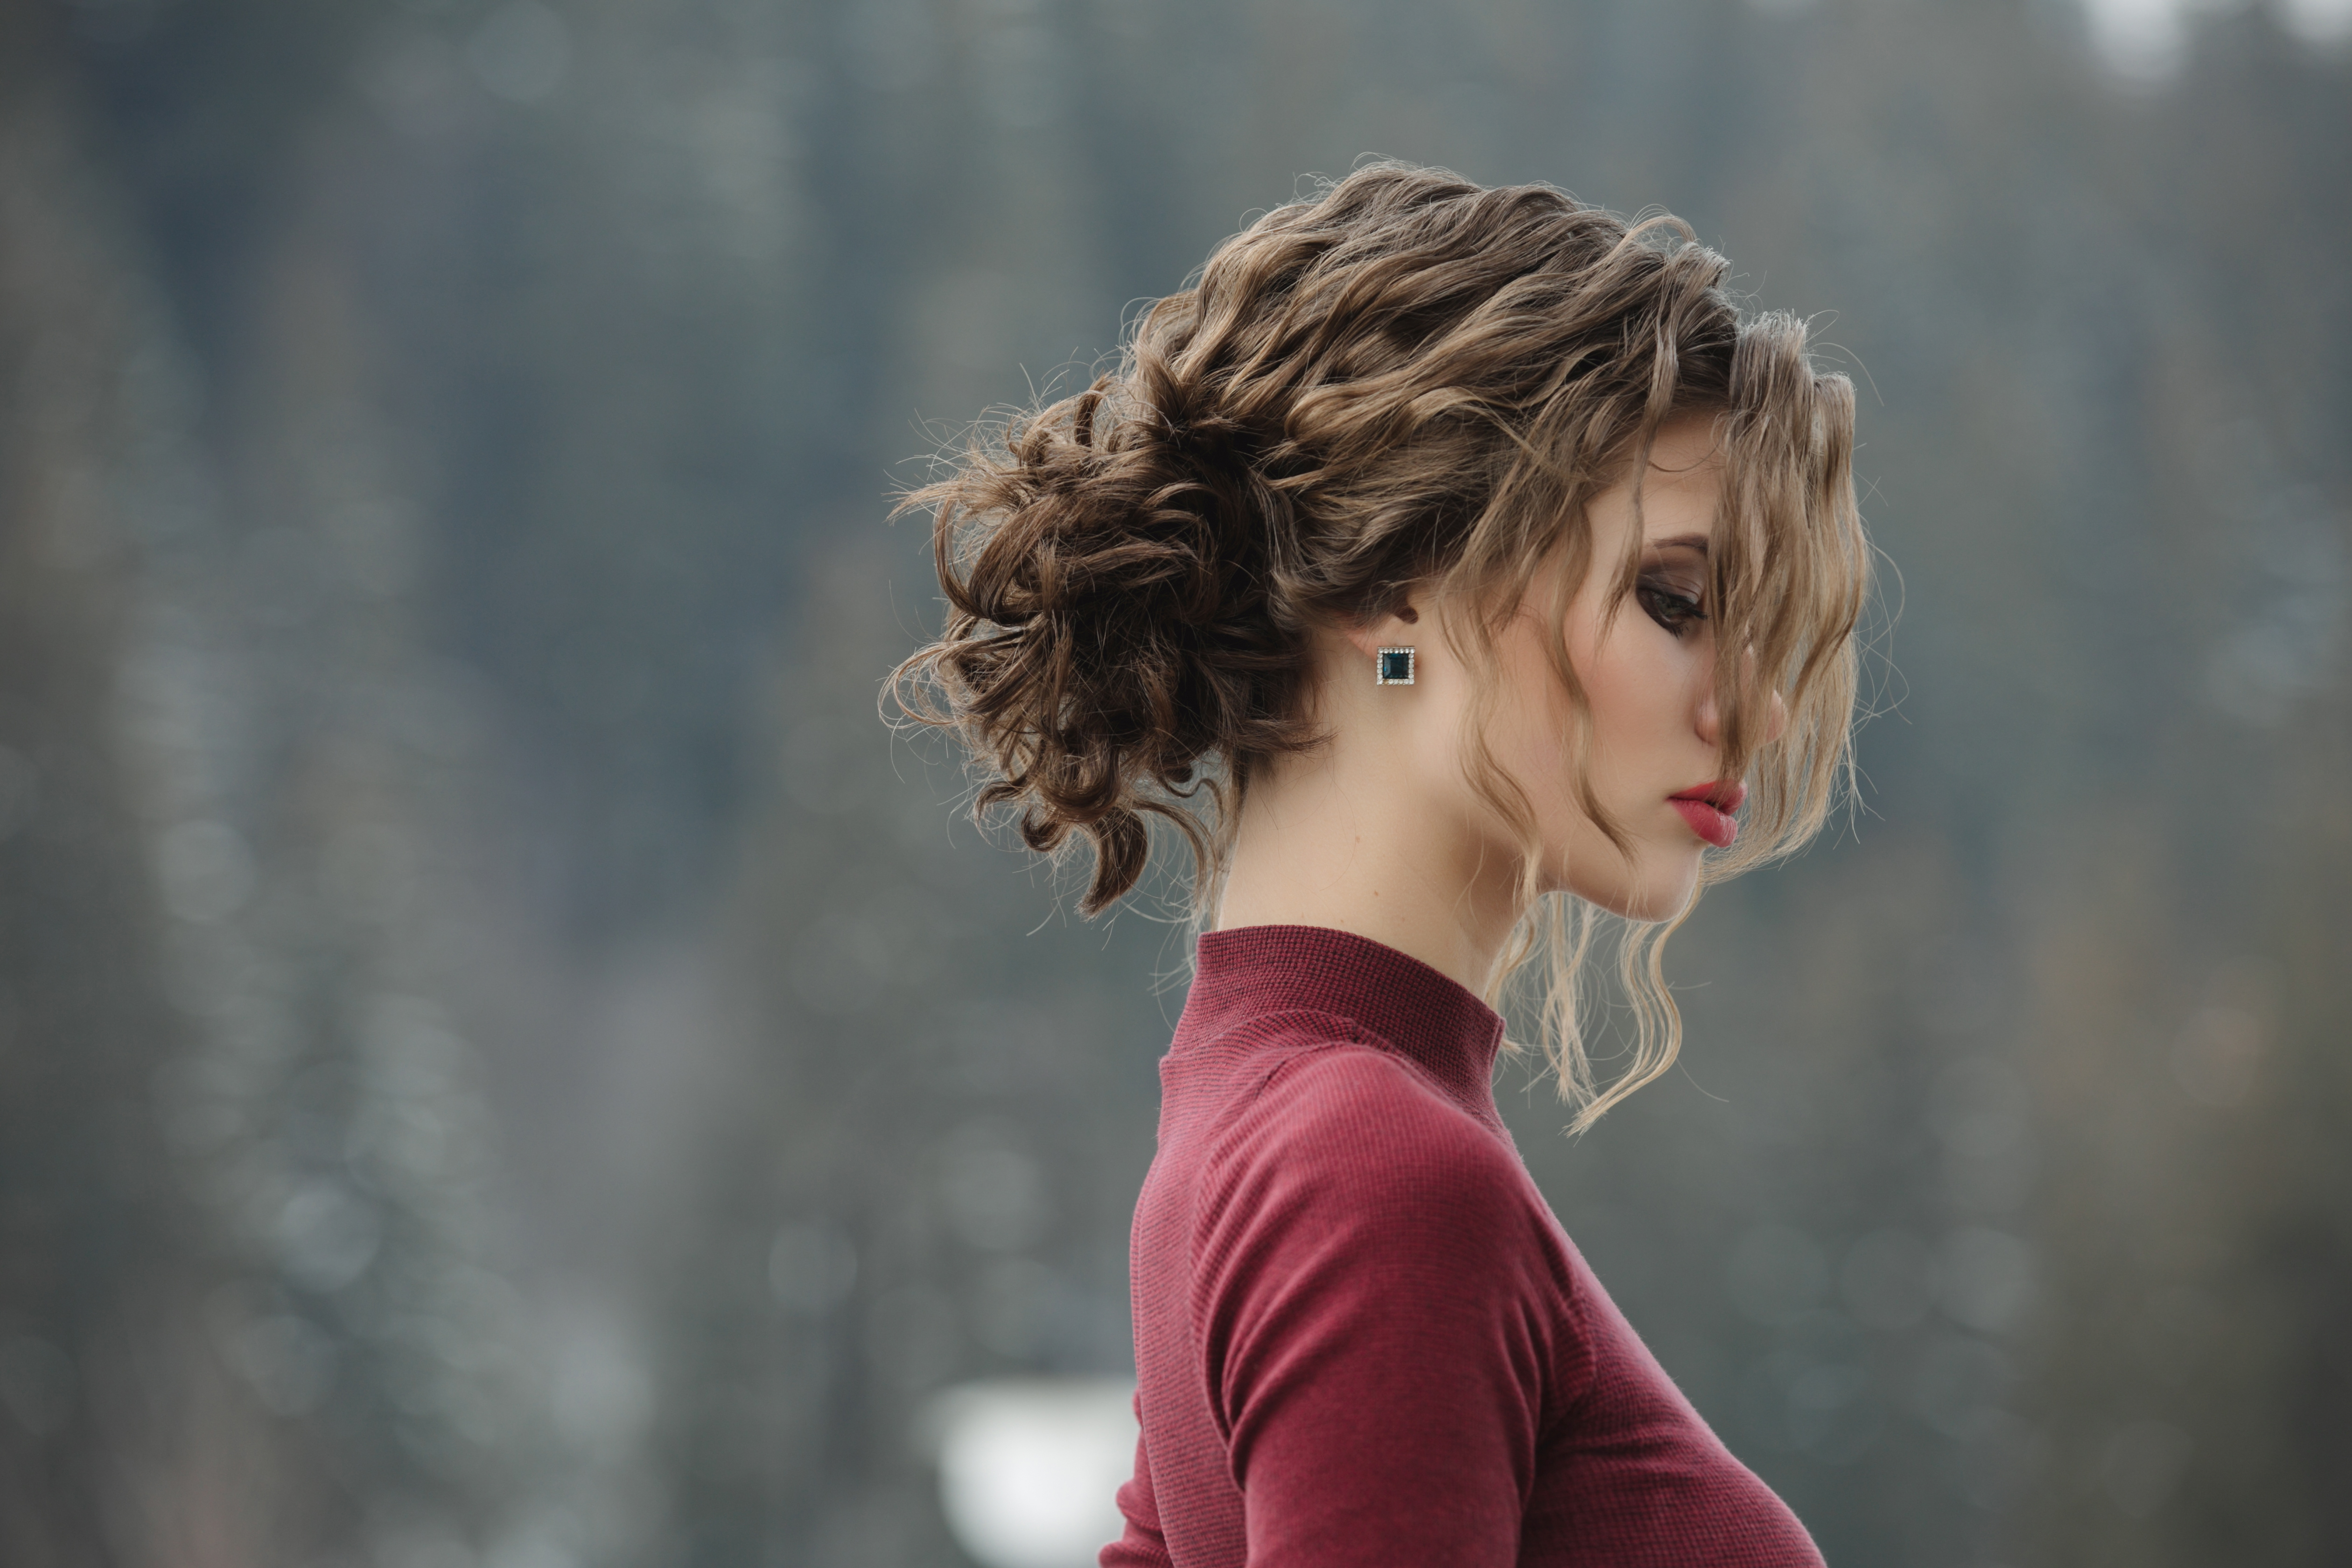 Woman with curly hairstyle at winter